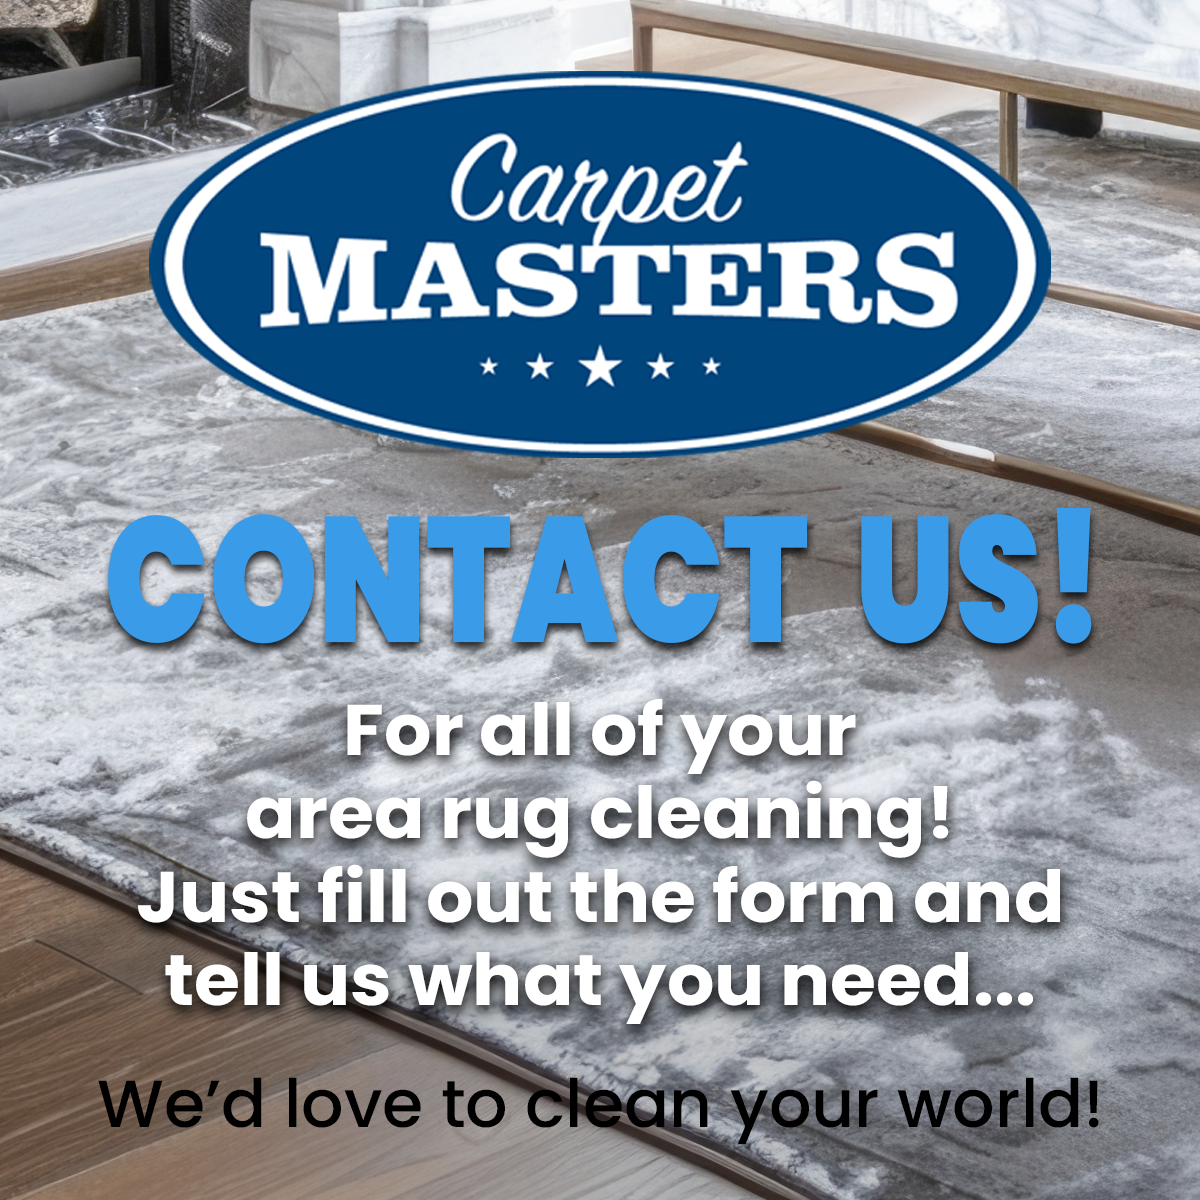 Contact Us for all of your area rug cleaning! Just tell us what you need...